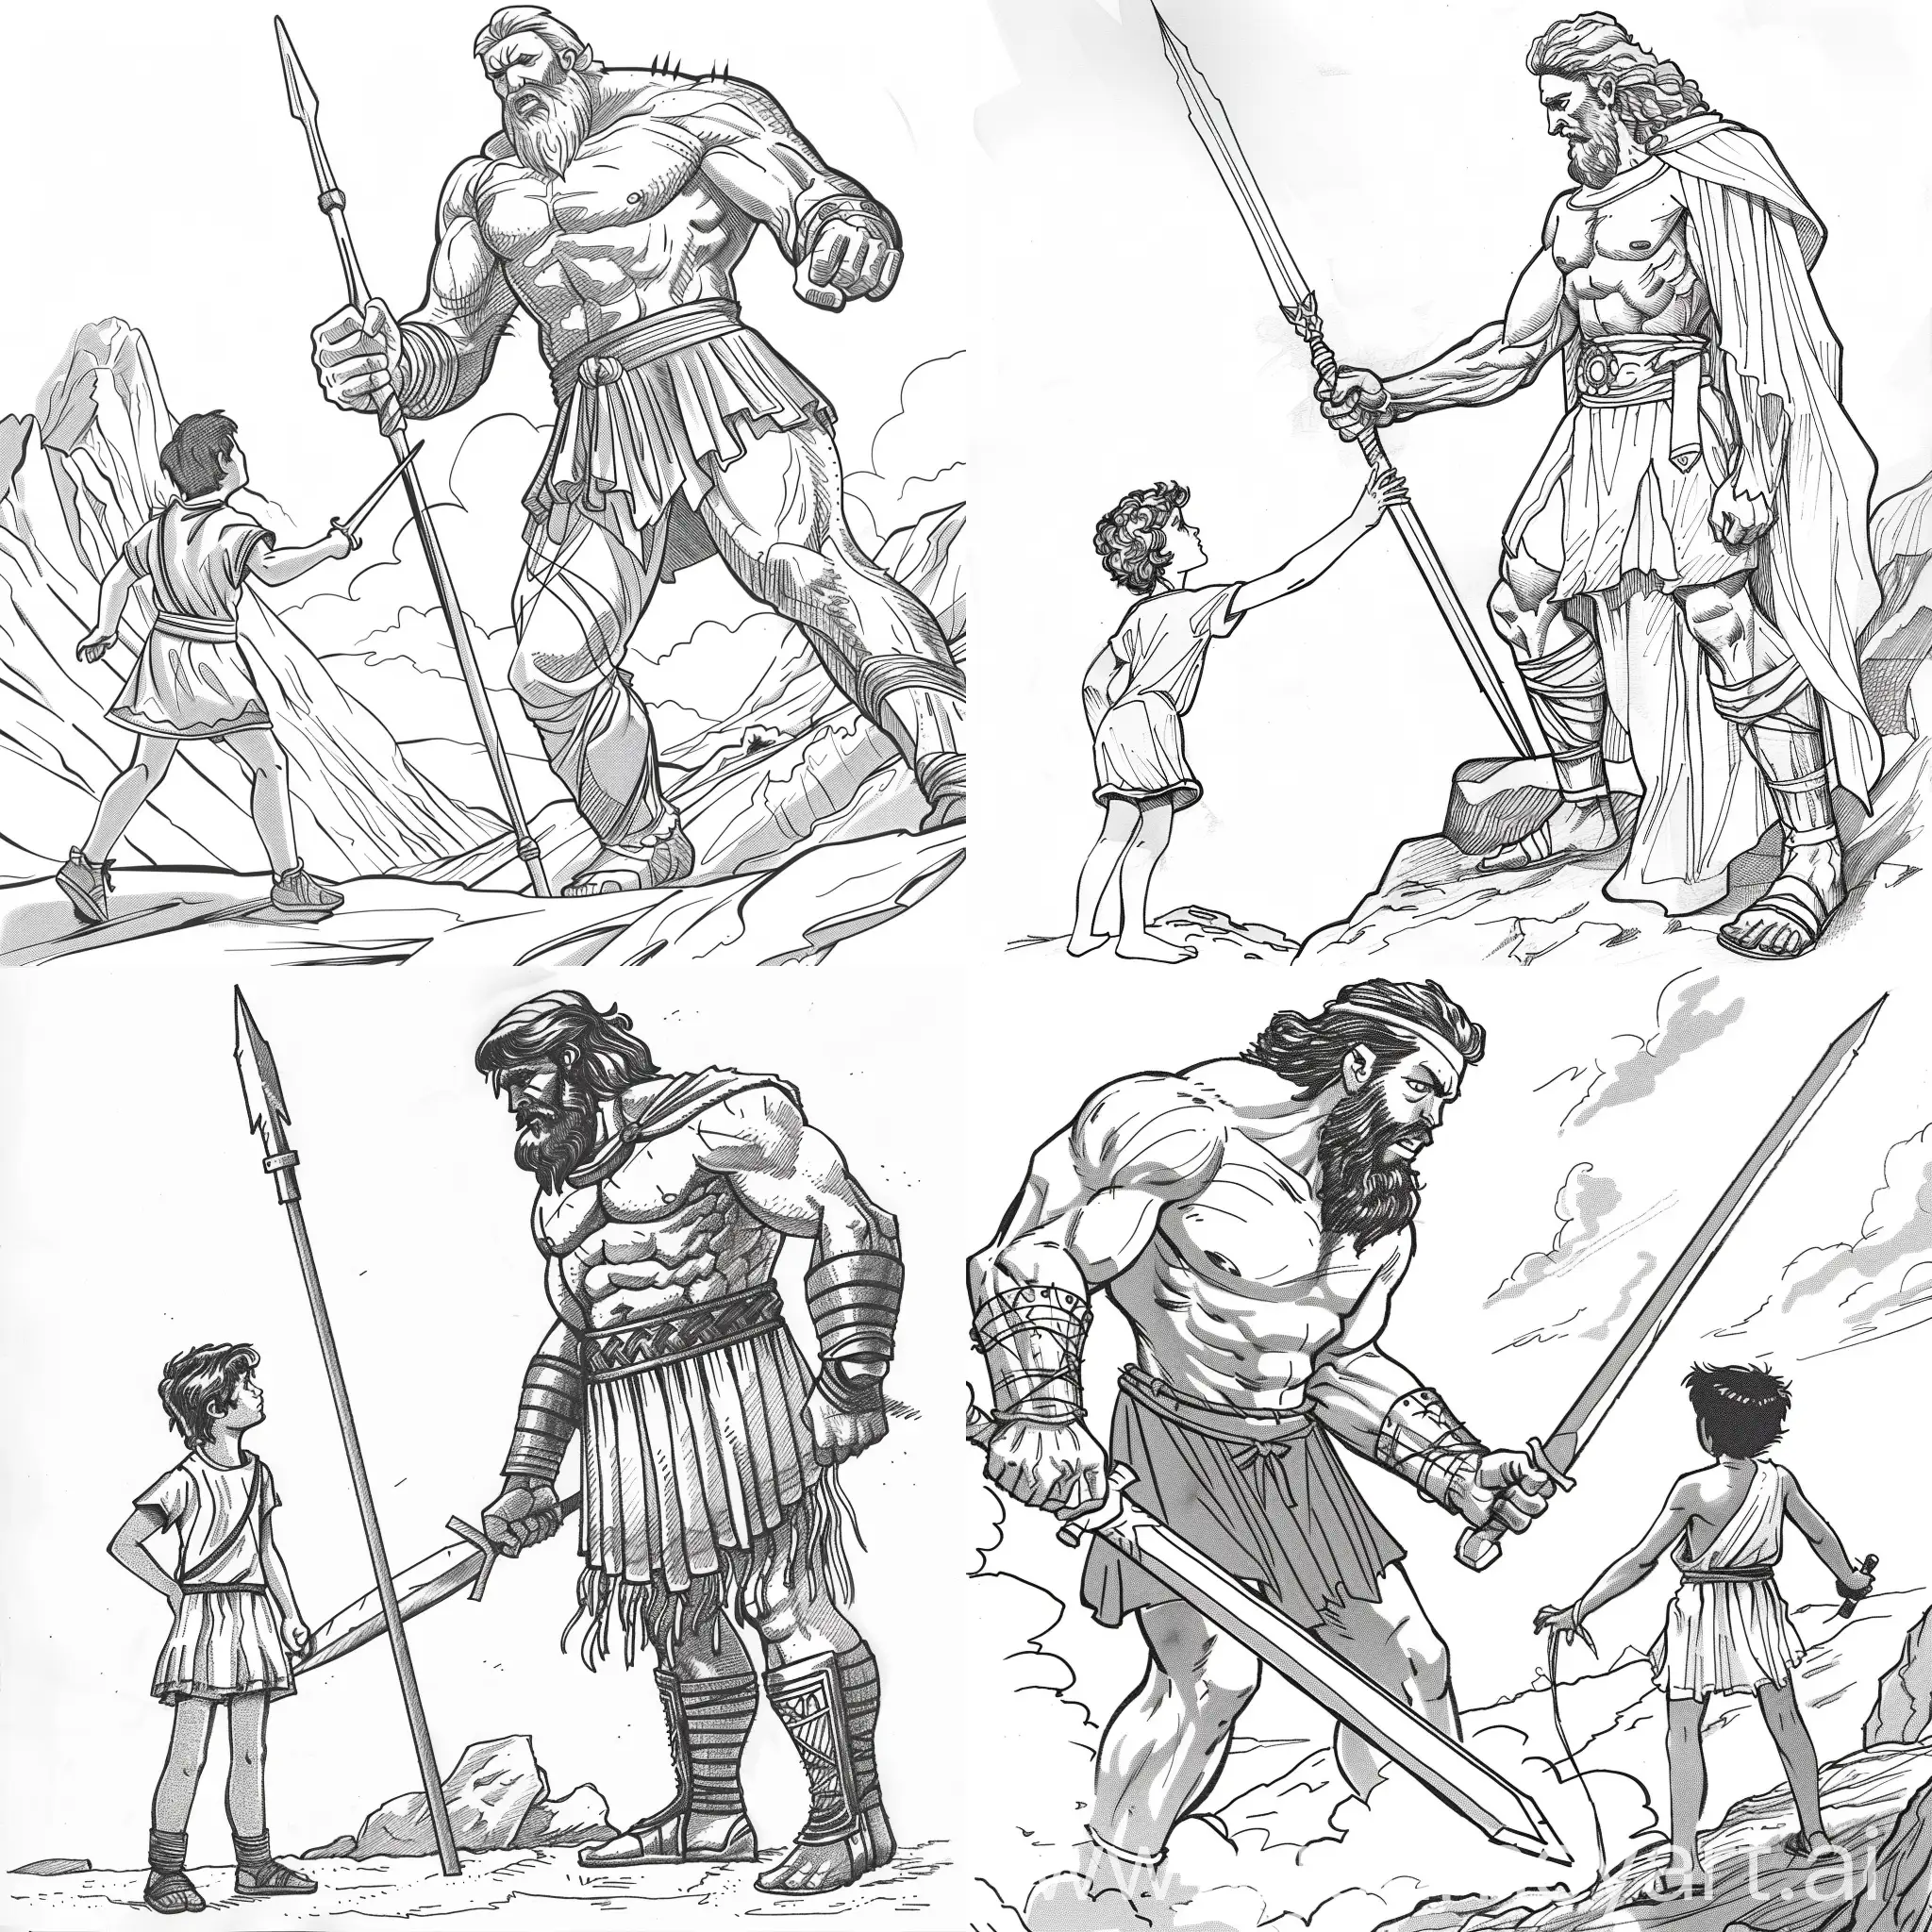 Biblical-Cartoon-Drawing-of-David-and-Goliath-on-a-White-Background